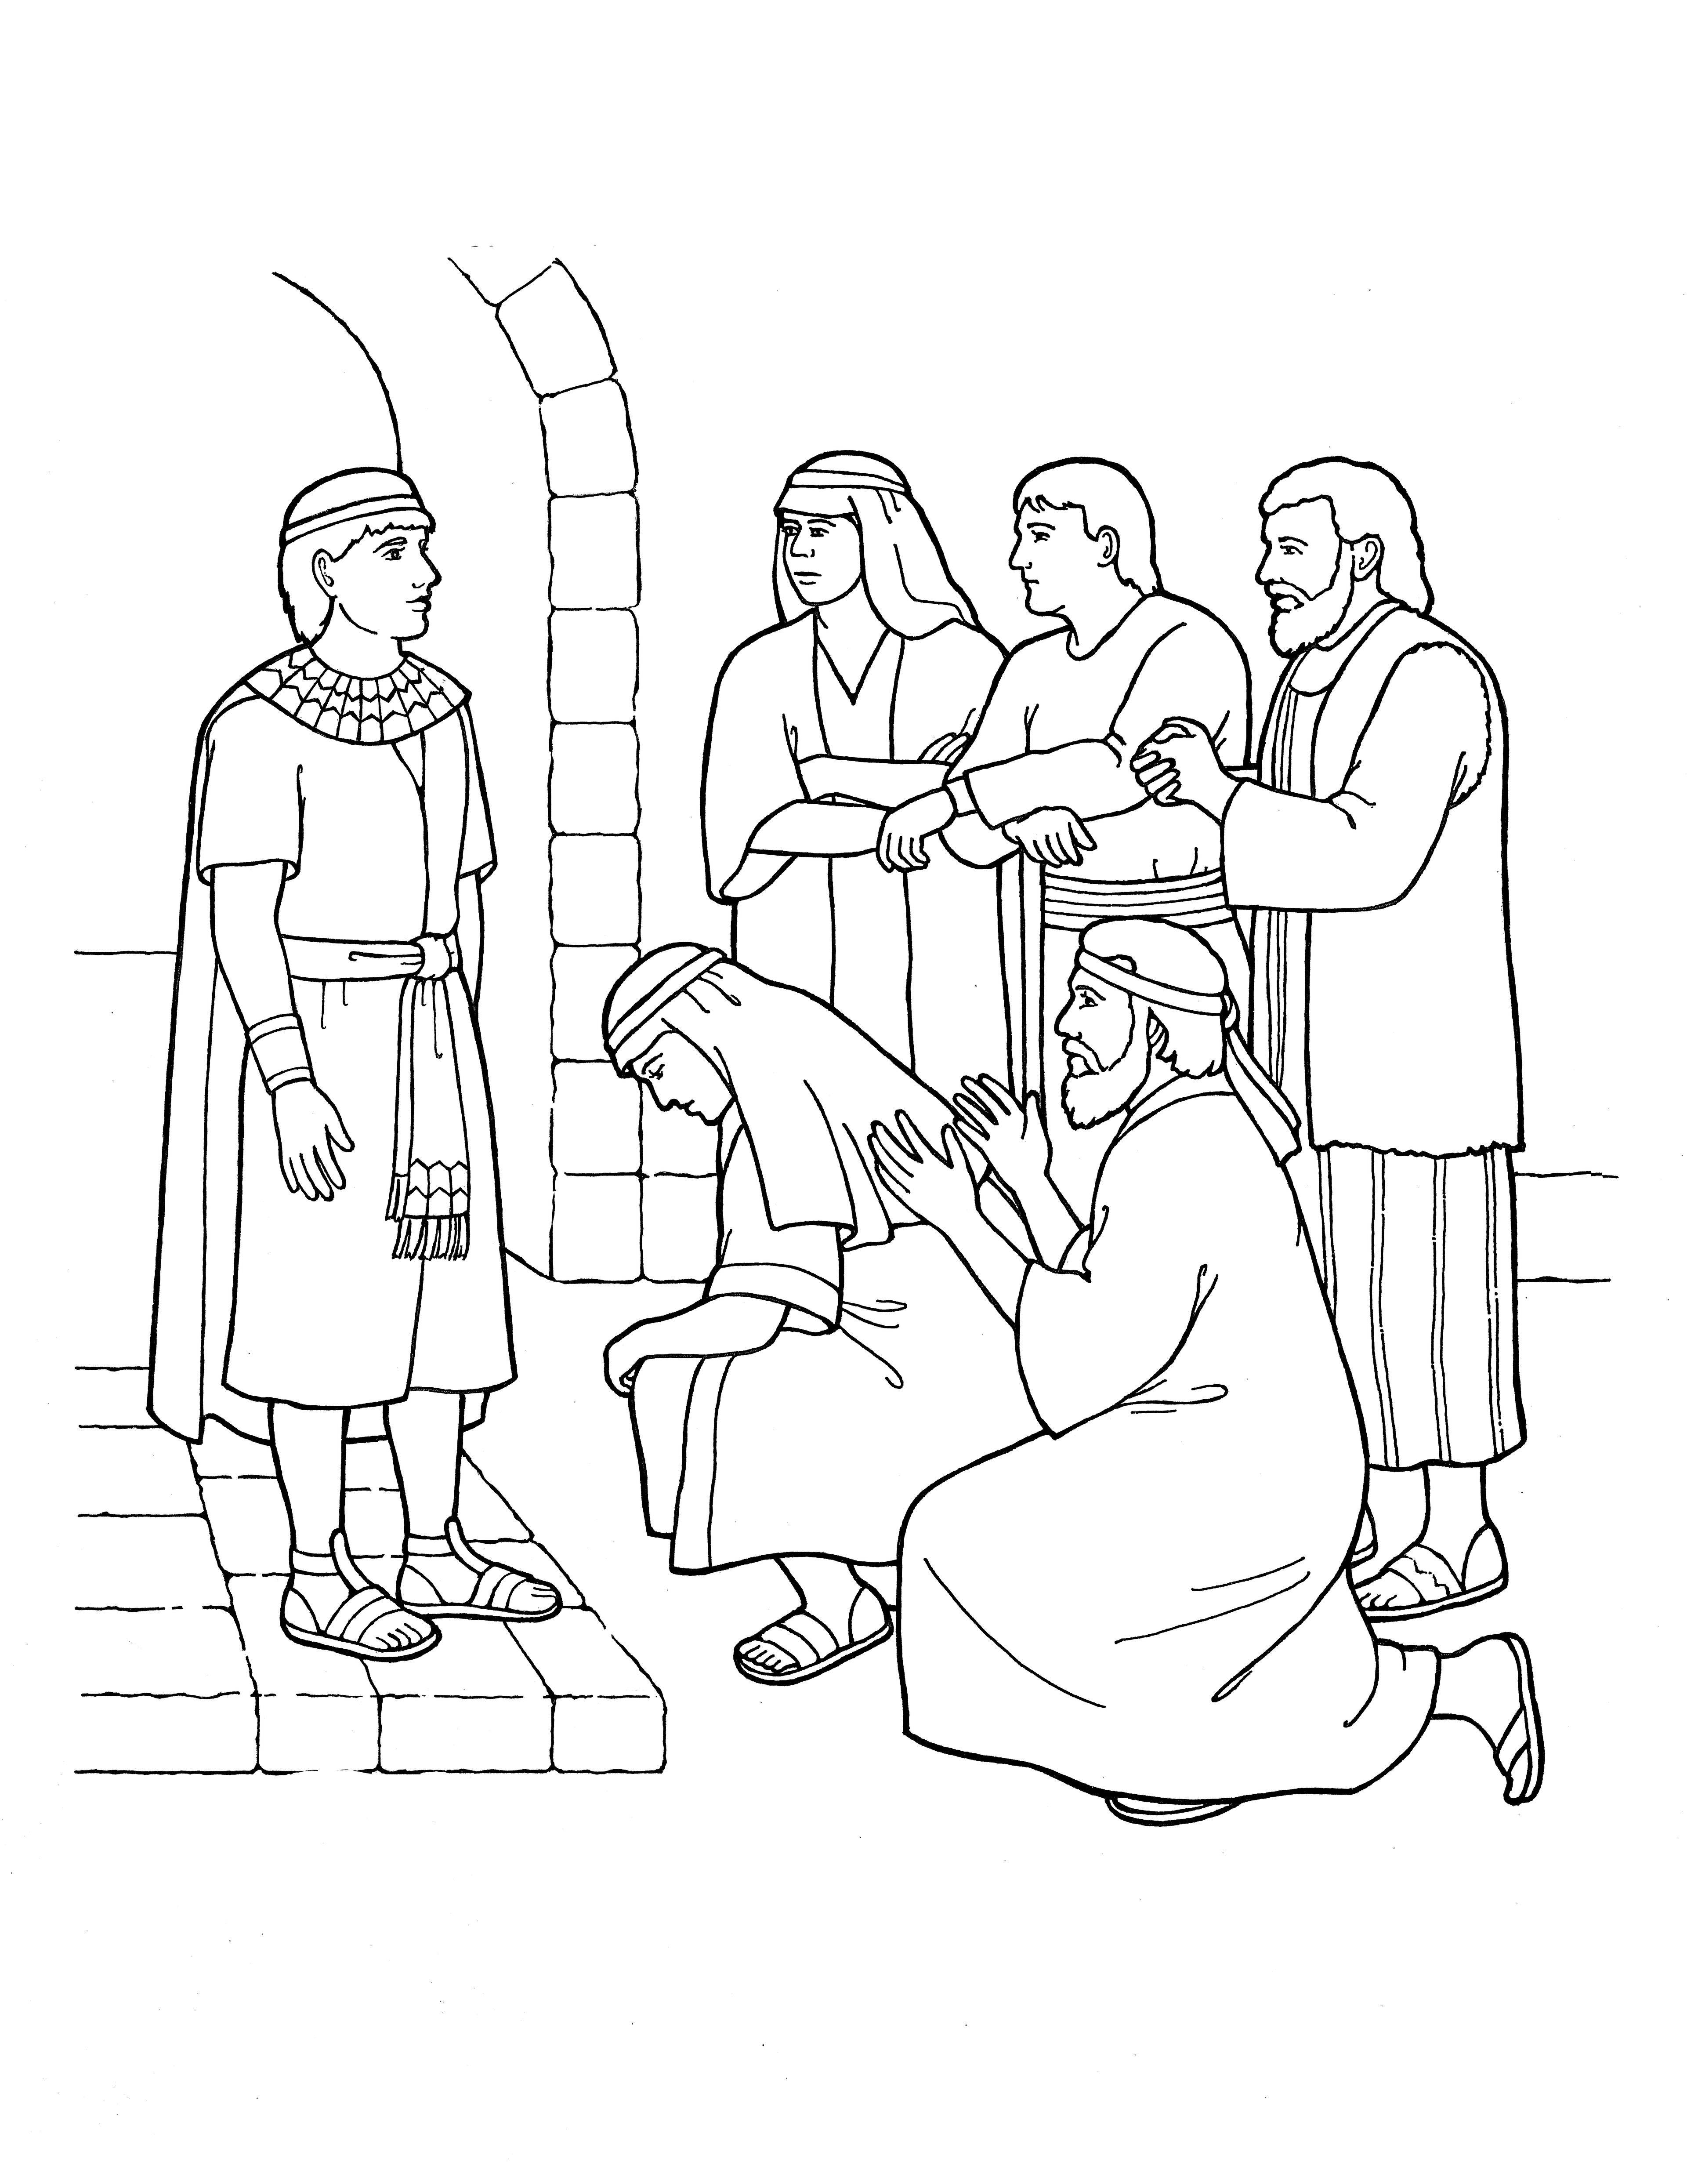 An illustration of Joseph forgiving his brothers.